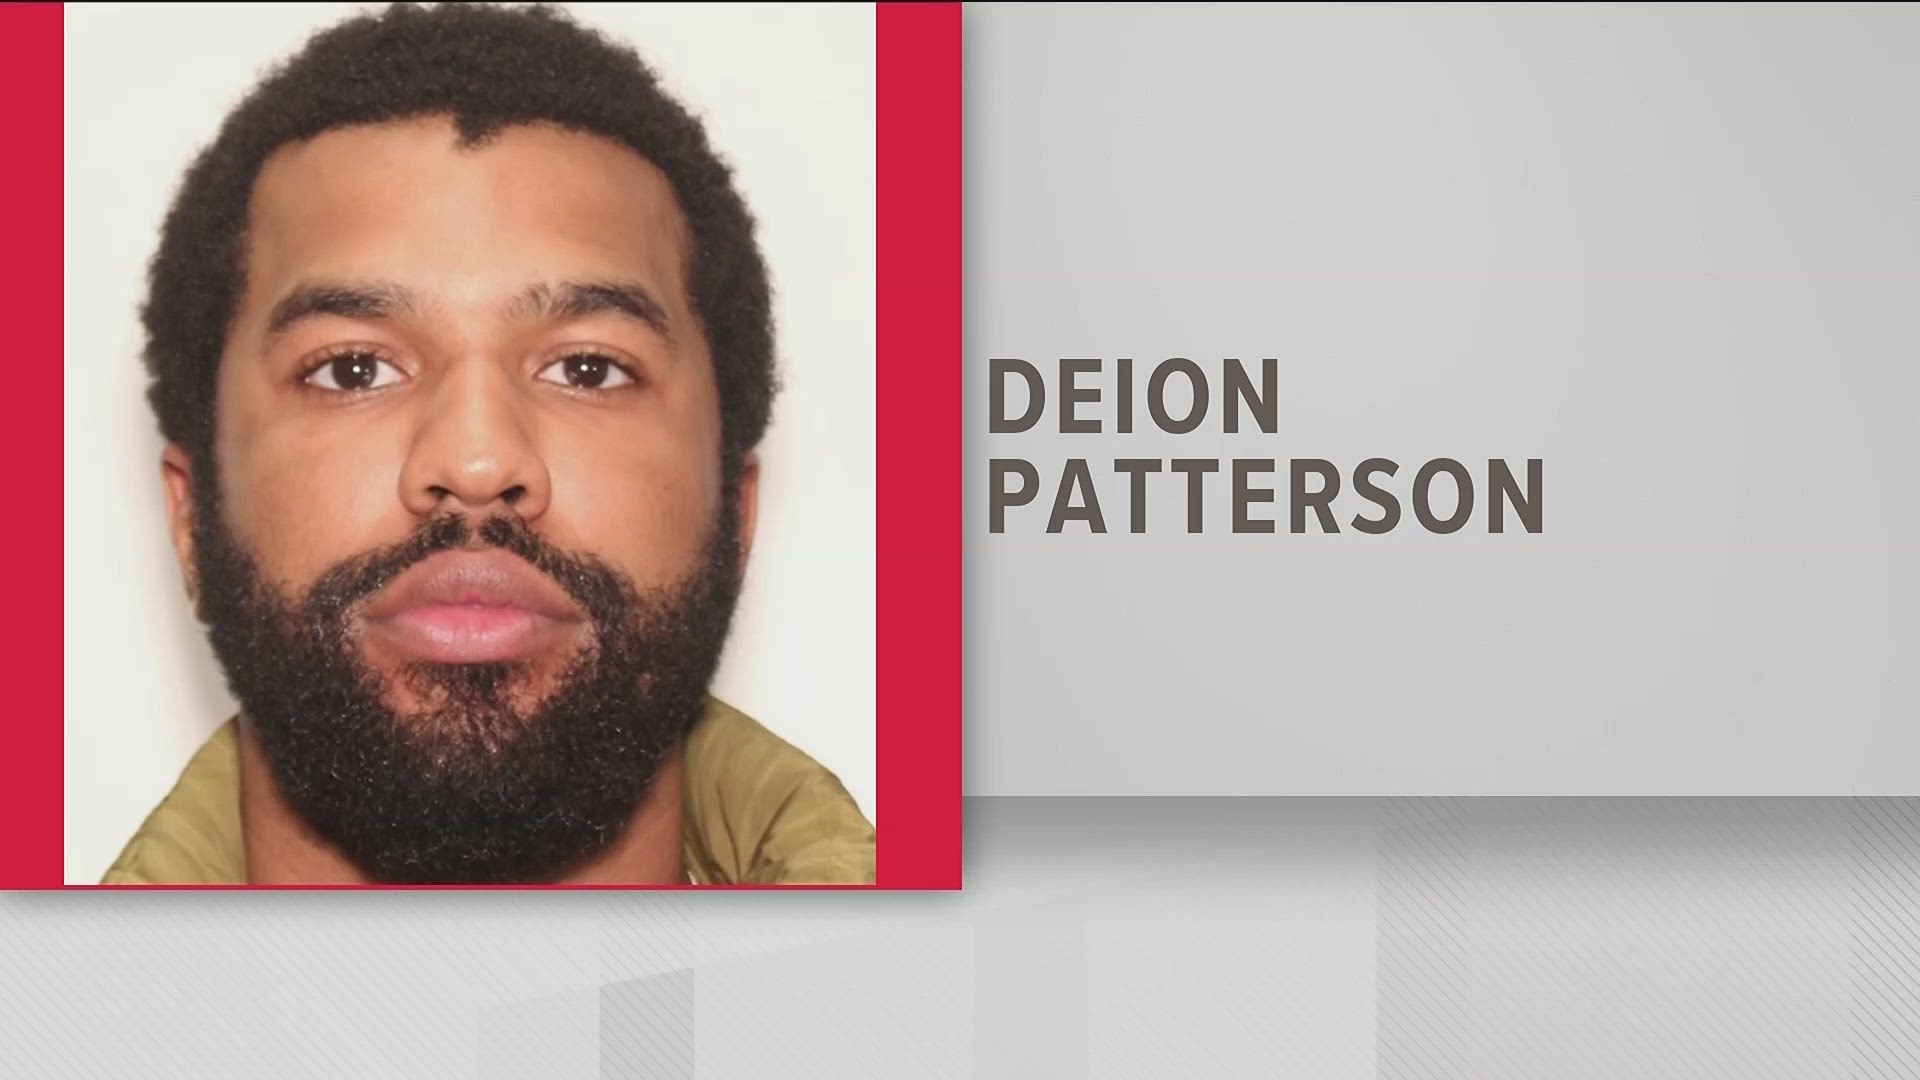 In an update, Cobb County Police said Deion Patterson's car was found in a parking deck near The Battery.